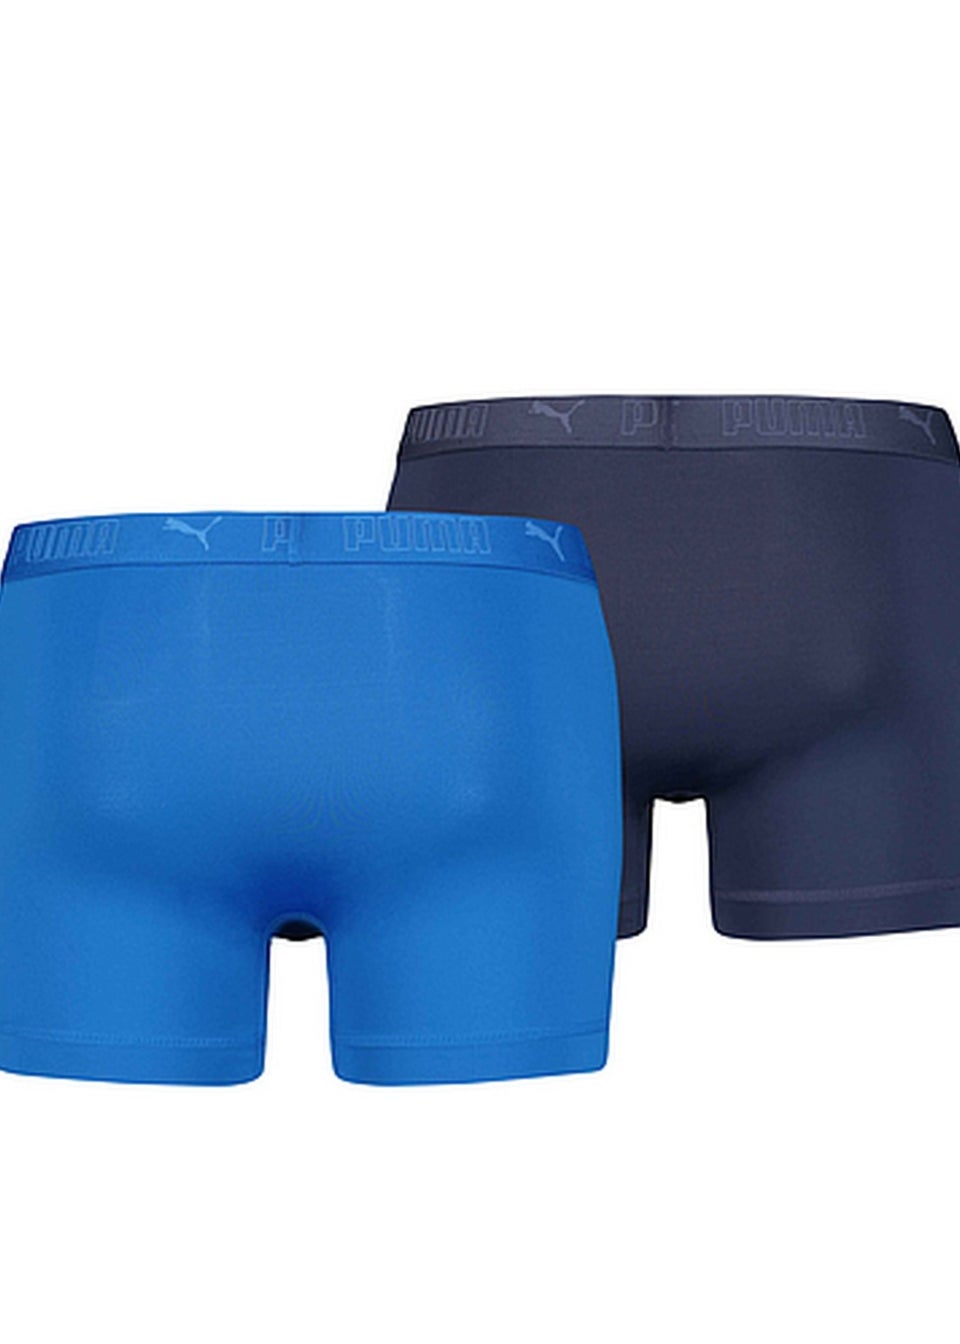 Puma Blue Active Boxer Shorts (Pack of 2)